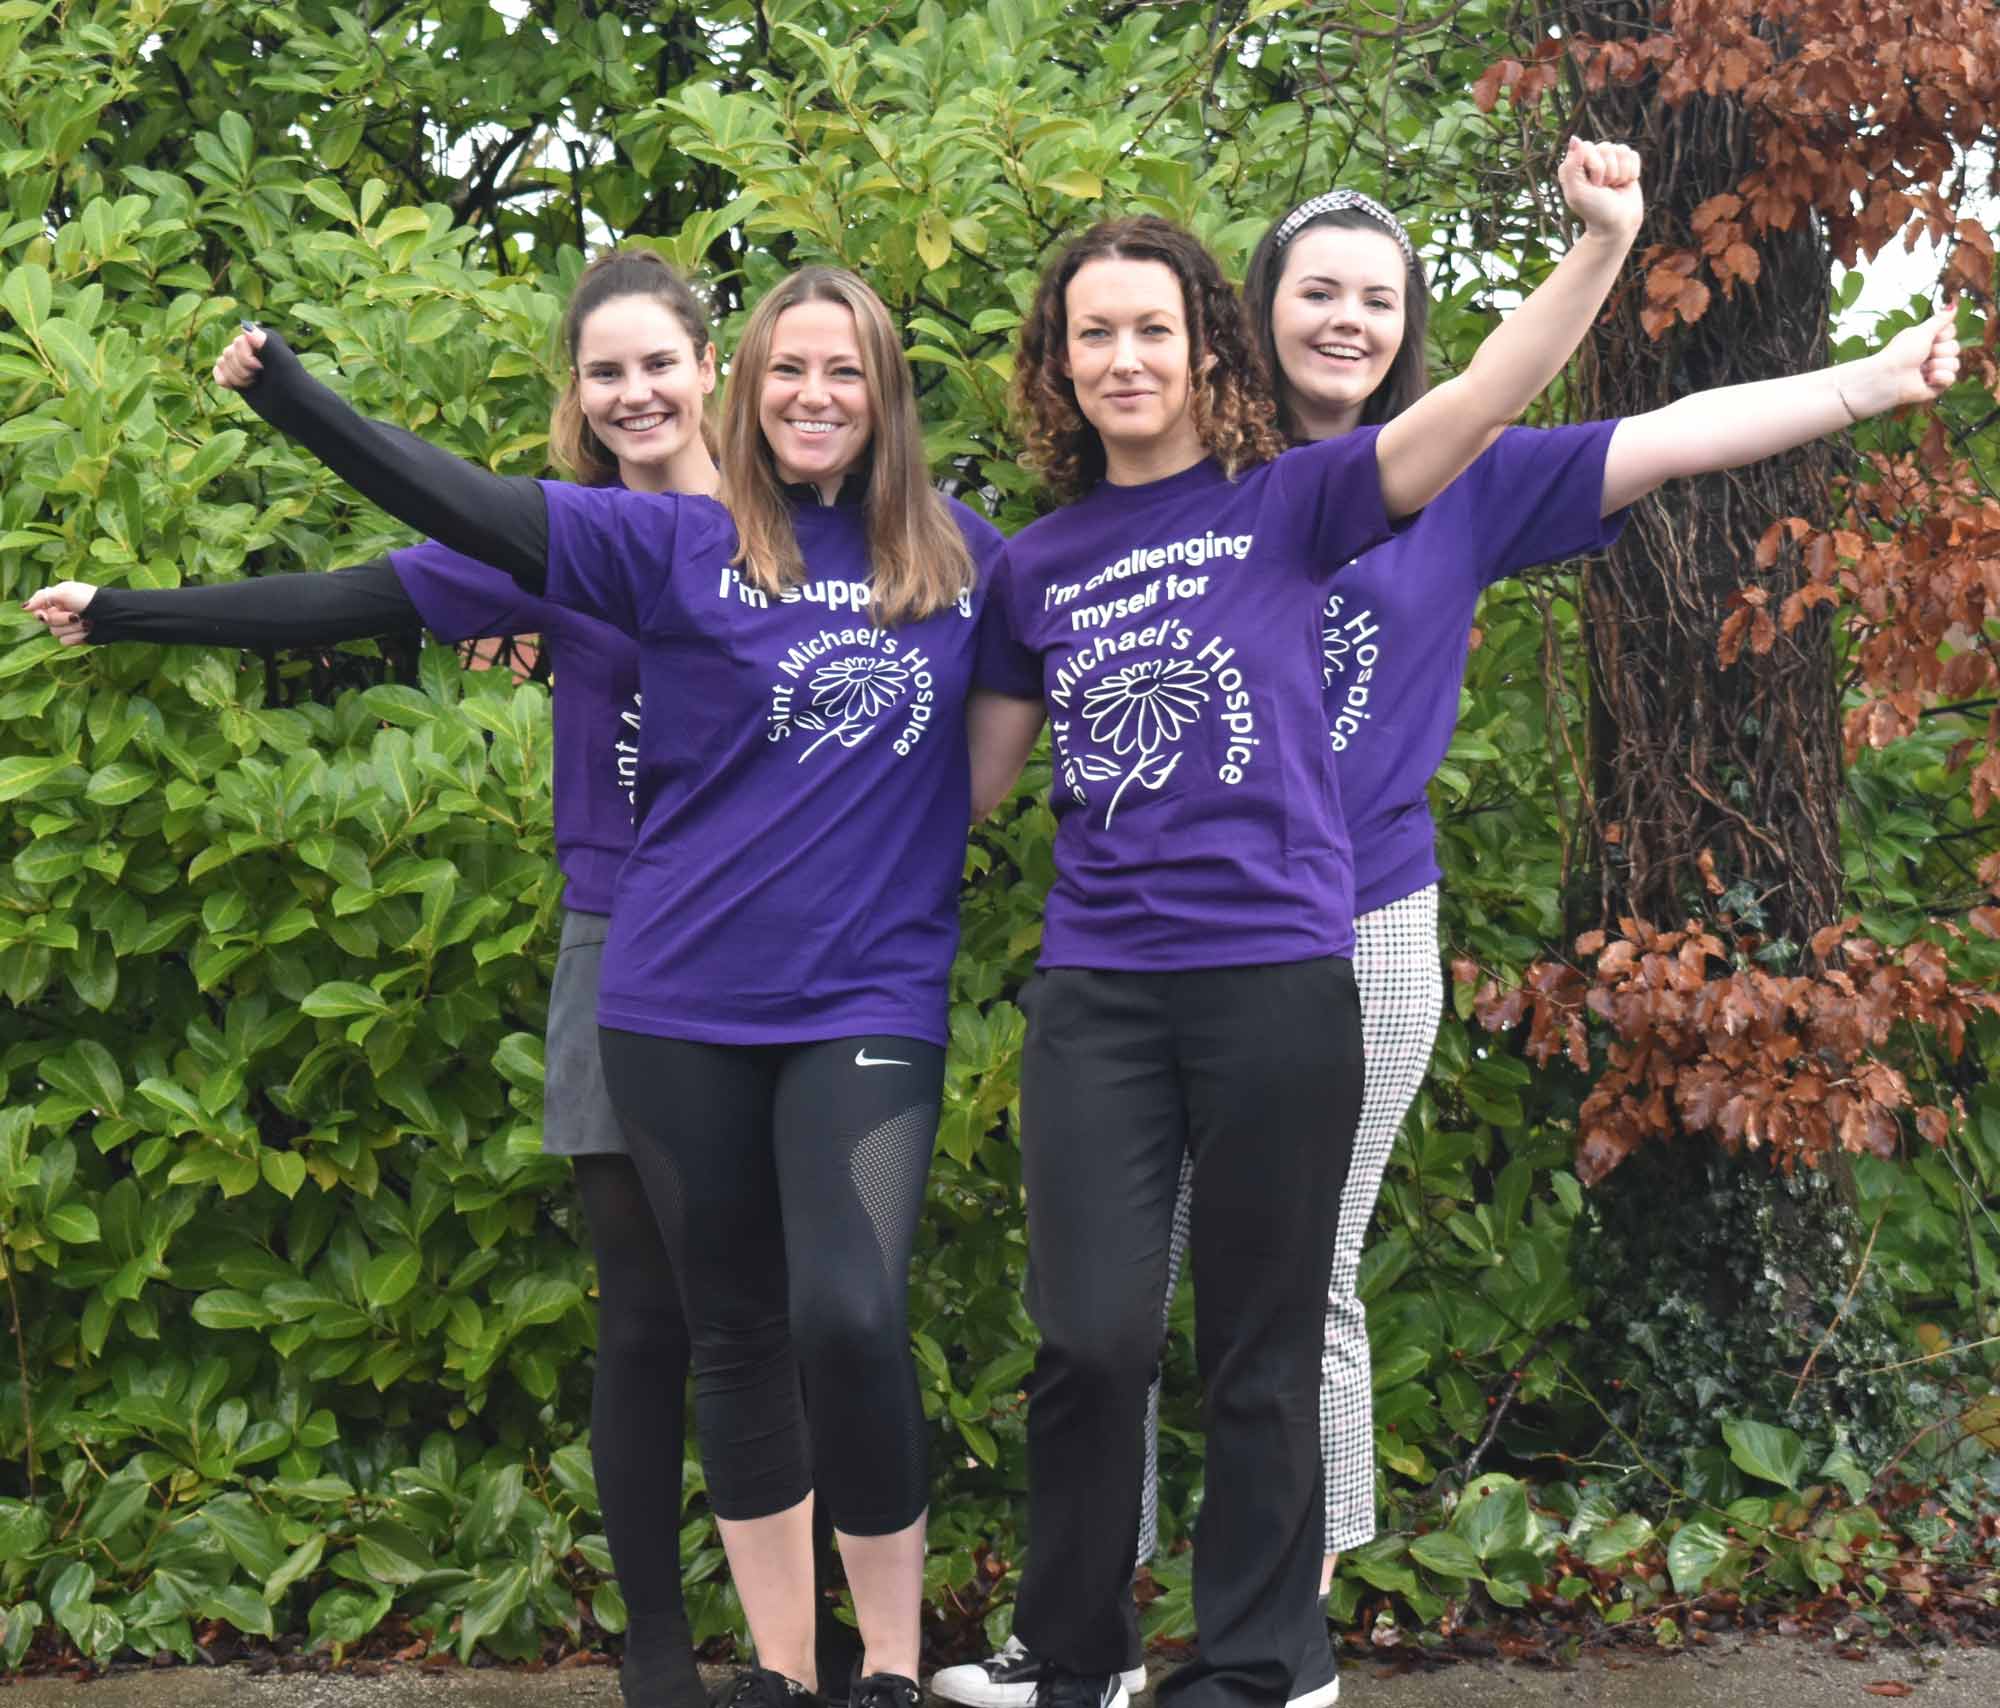 Susana Shaw, Georgia Peral, Hannah Hardy and Brogan Woodward of Saint Michael’s getting ready for the Marathon in a Month challenge